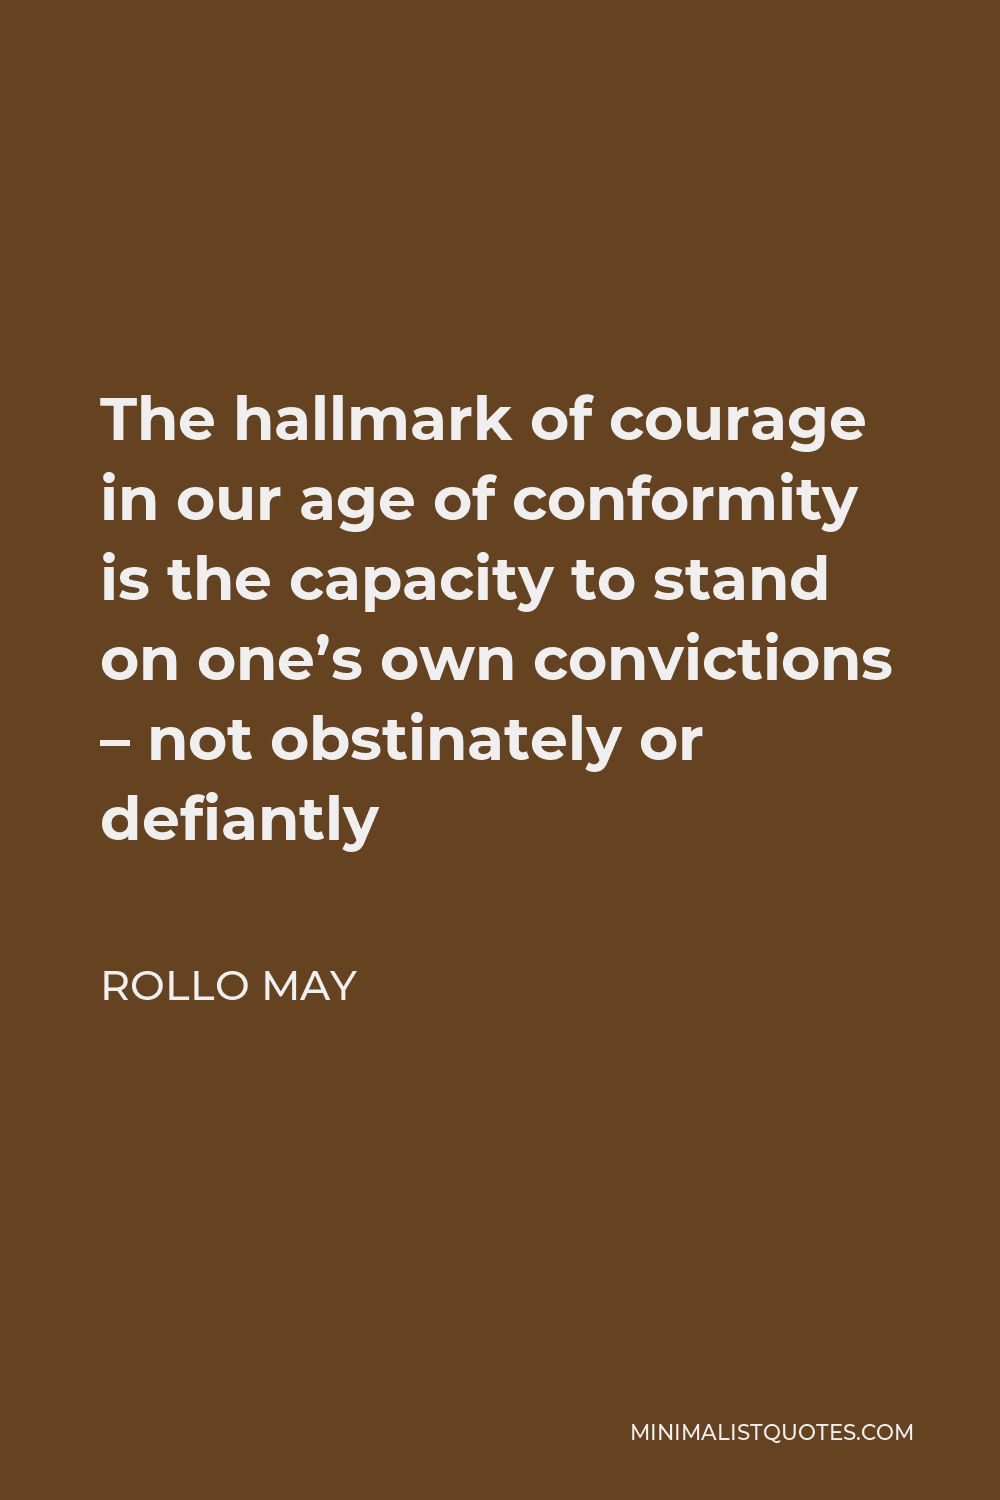 Rollo May Quote - The hallmark of courage in our age of conformity is the capacity to stand on one’s own convictions – not obstinately or defiantly